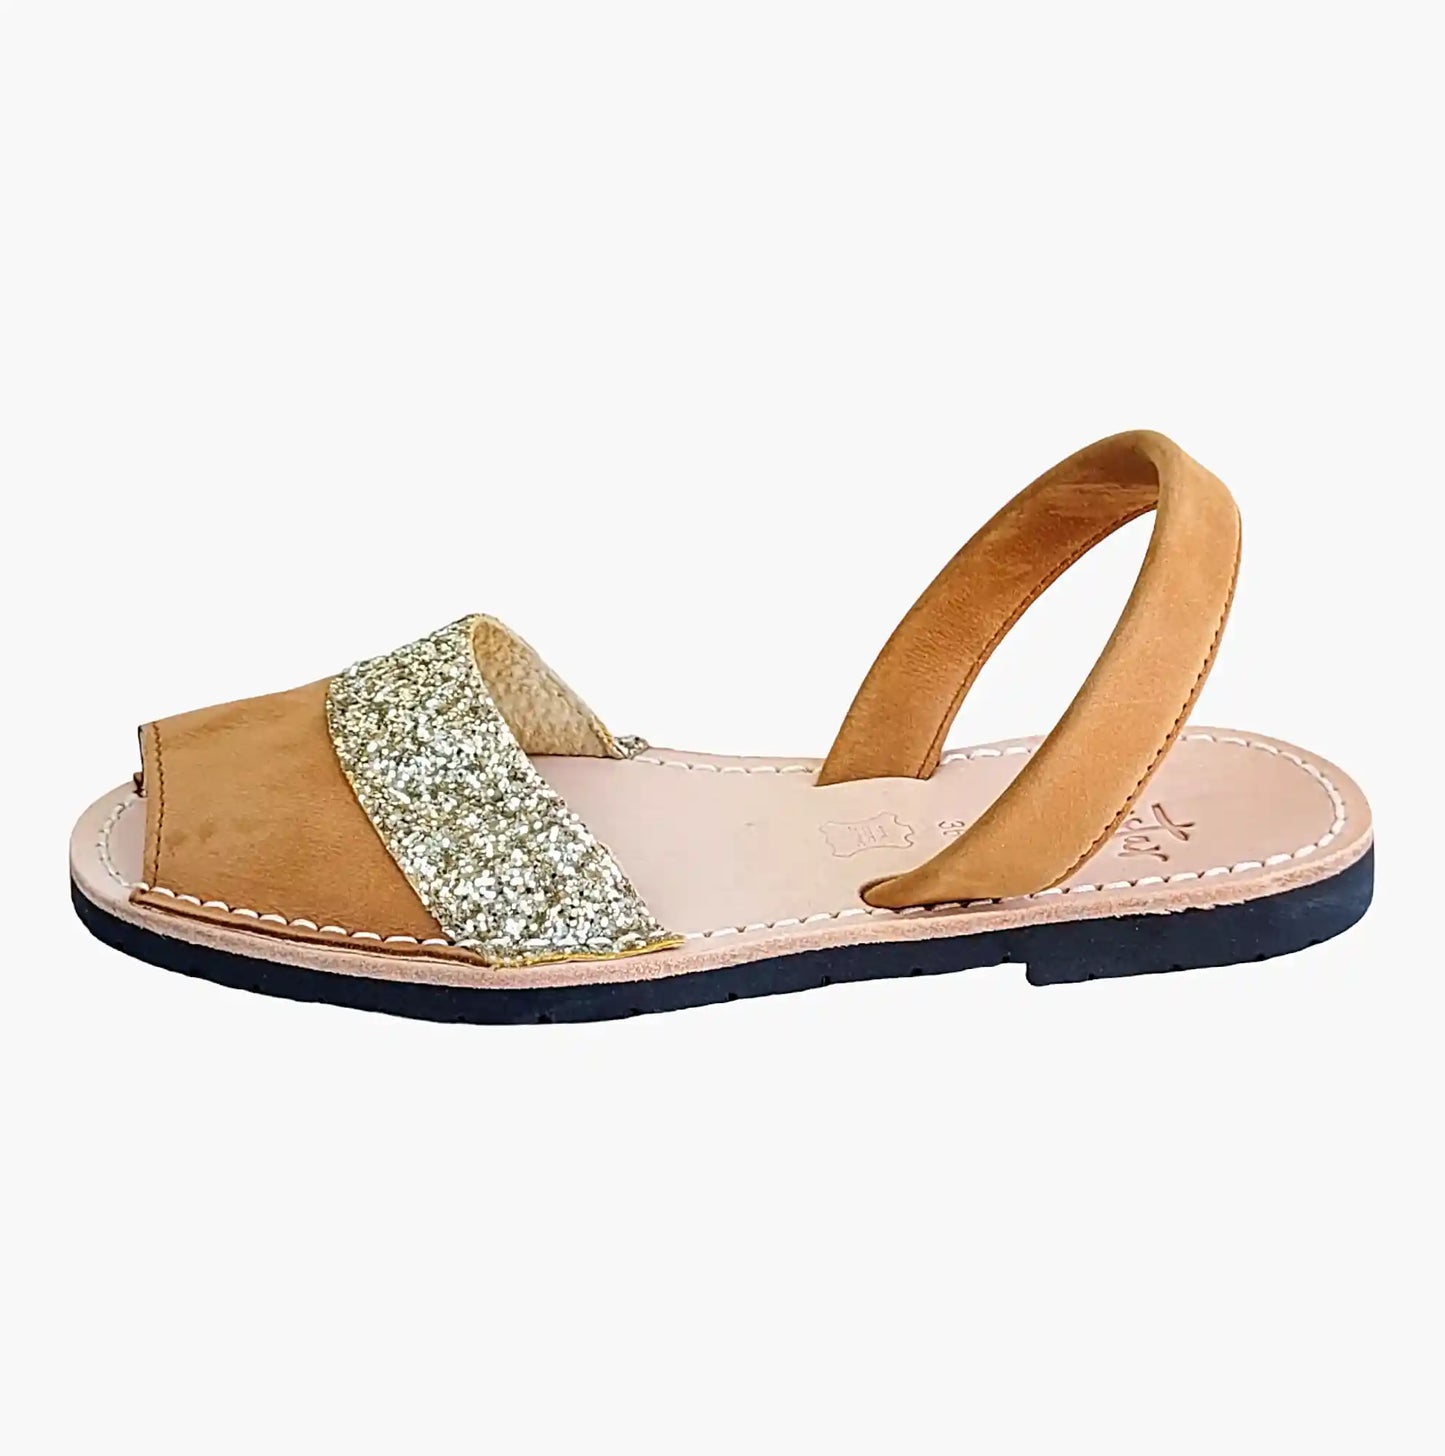 Avarcas-Duo-Tan-Gold-Glitter-Sandals-side-view